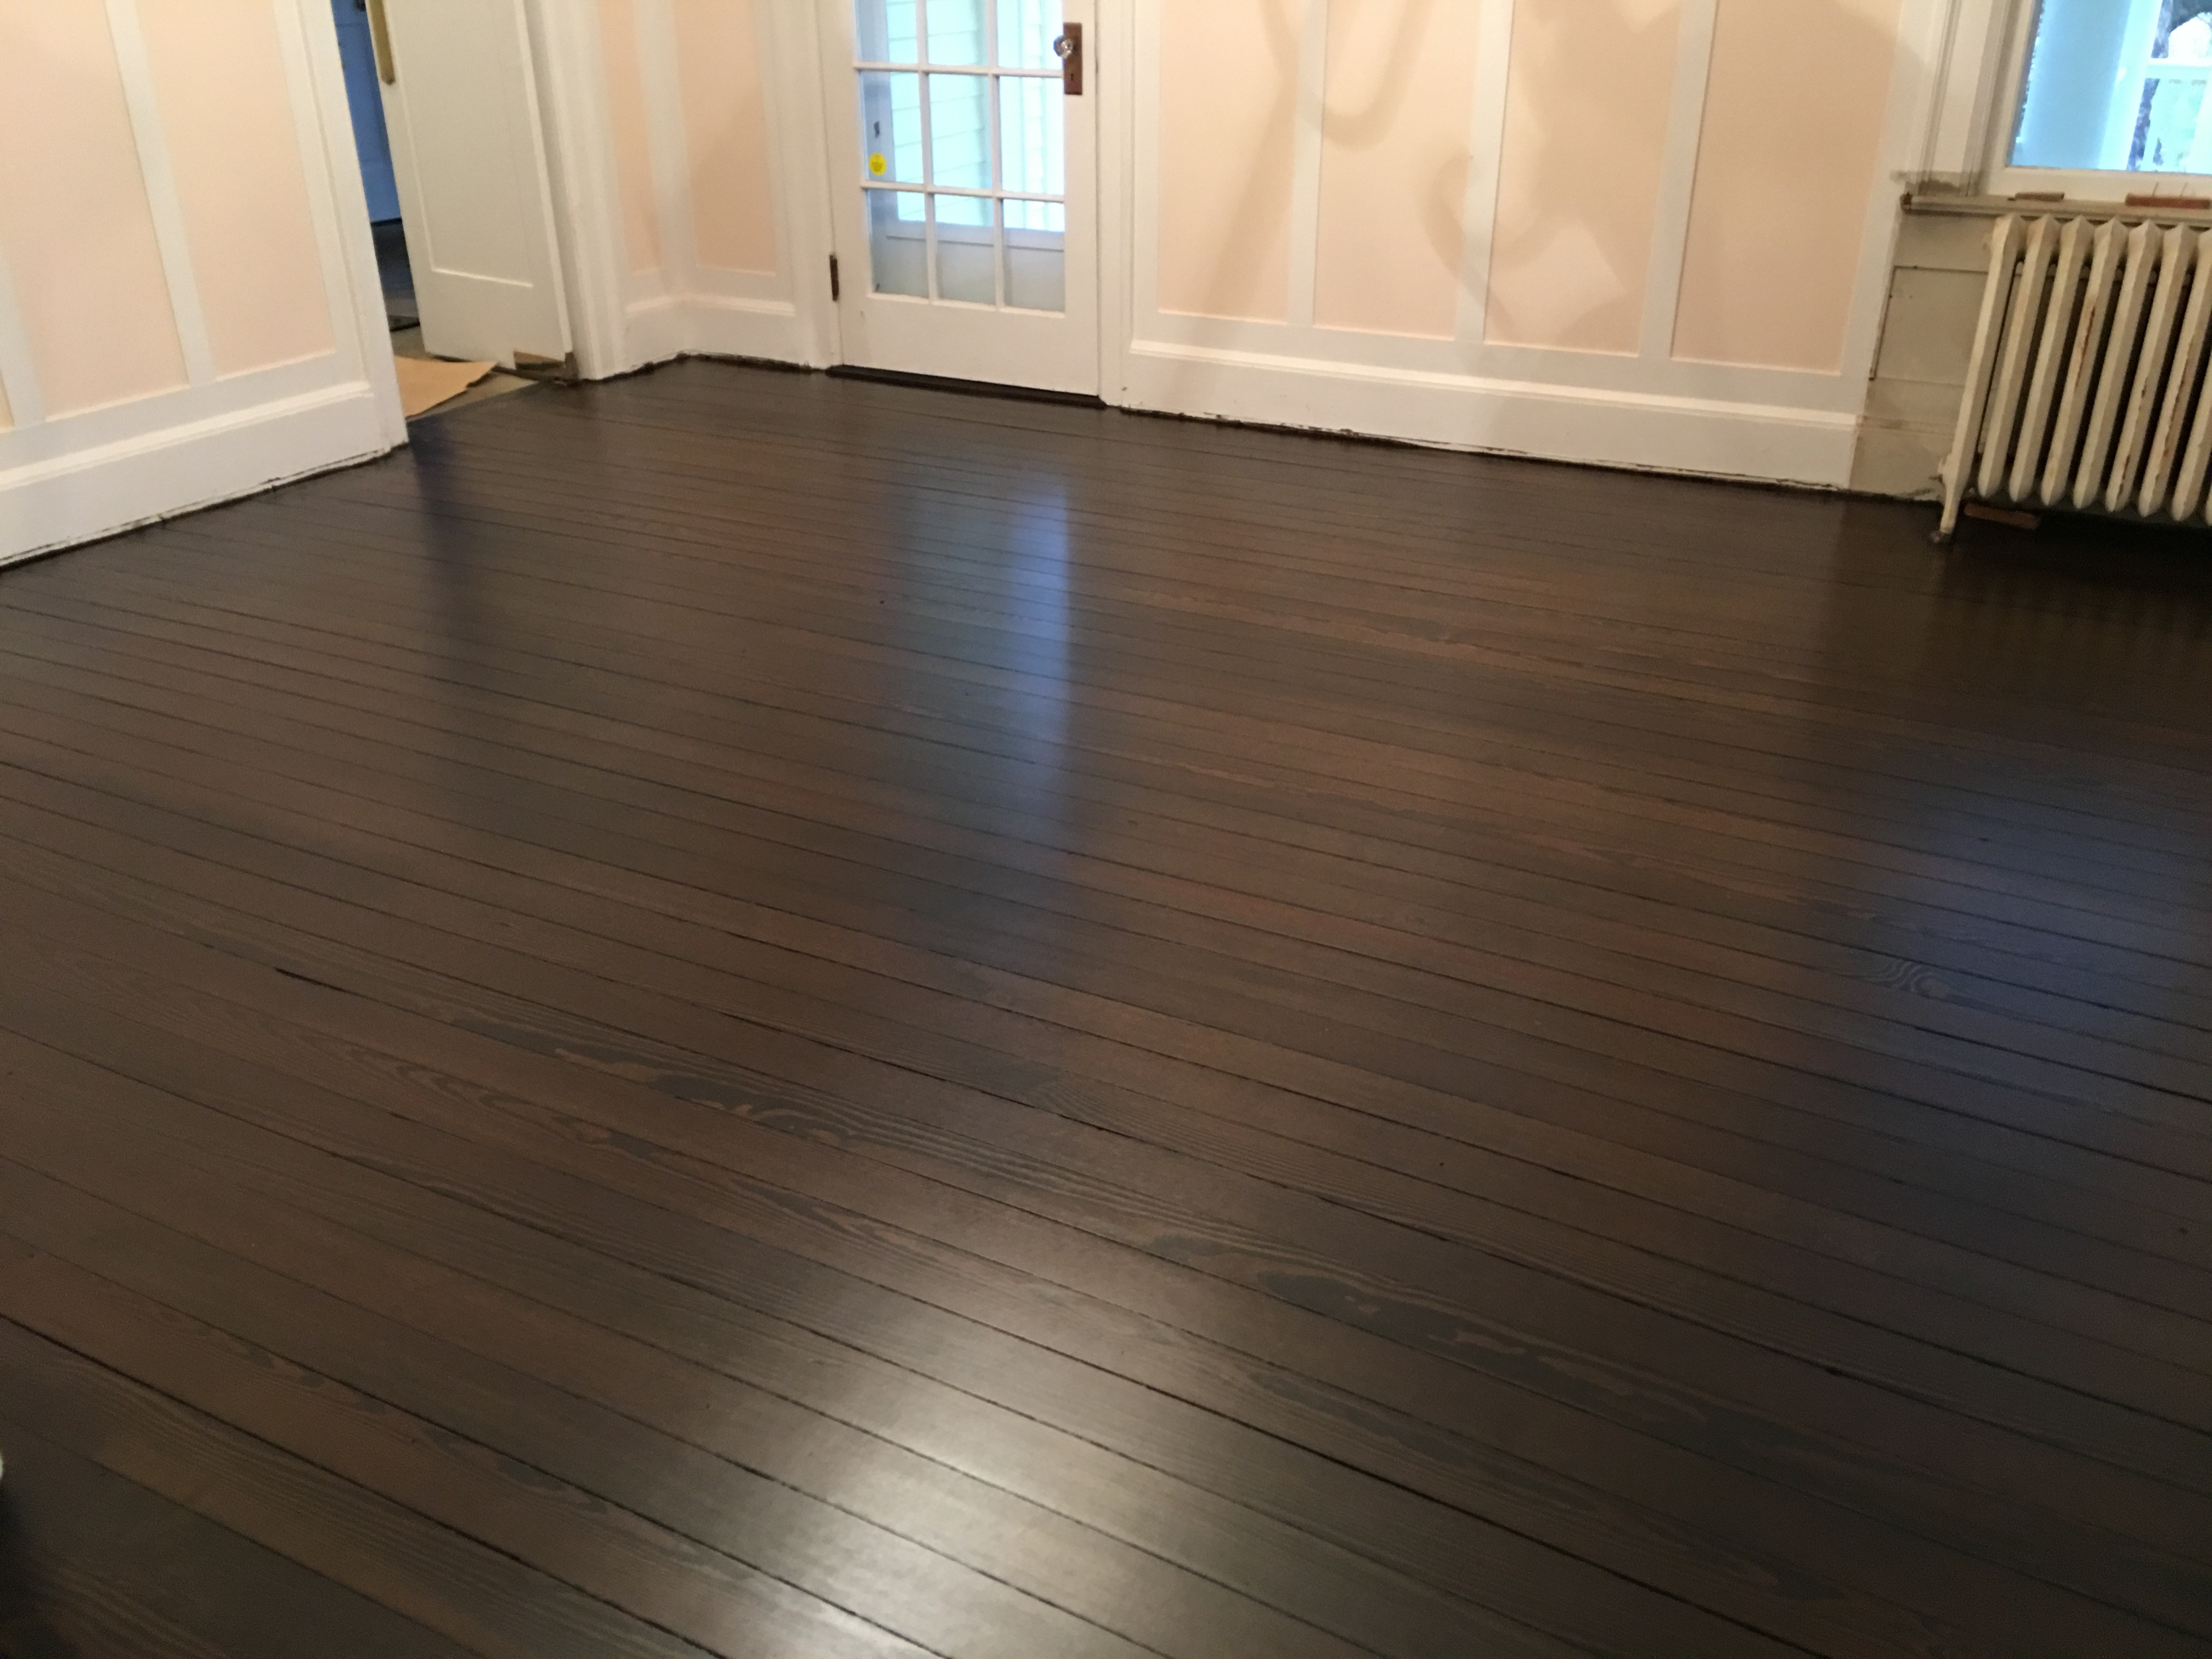 30 Fantastic Hardwood Floor Refinishing Westfield Nj 2024 free download hardwood floor refinishing westfield nj of selecta flooring 1820 historic wood floors in mendham new jersey intended for by suggesting a customized stain color for the floors selecta floorin